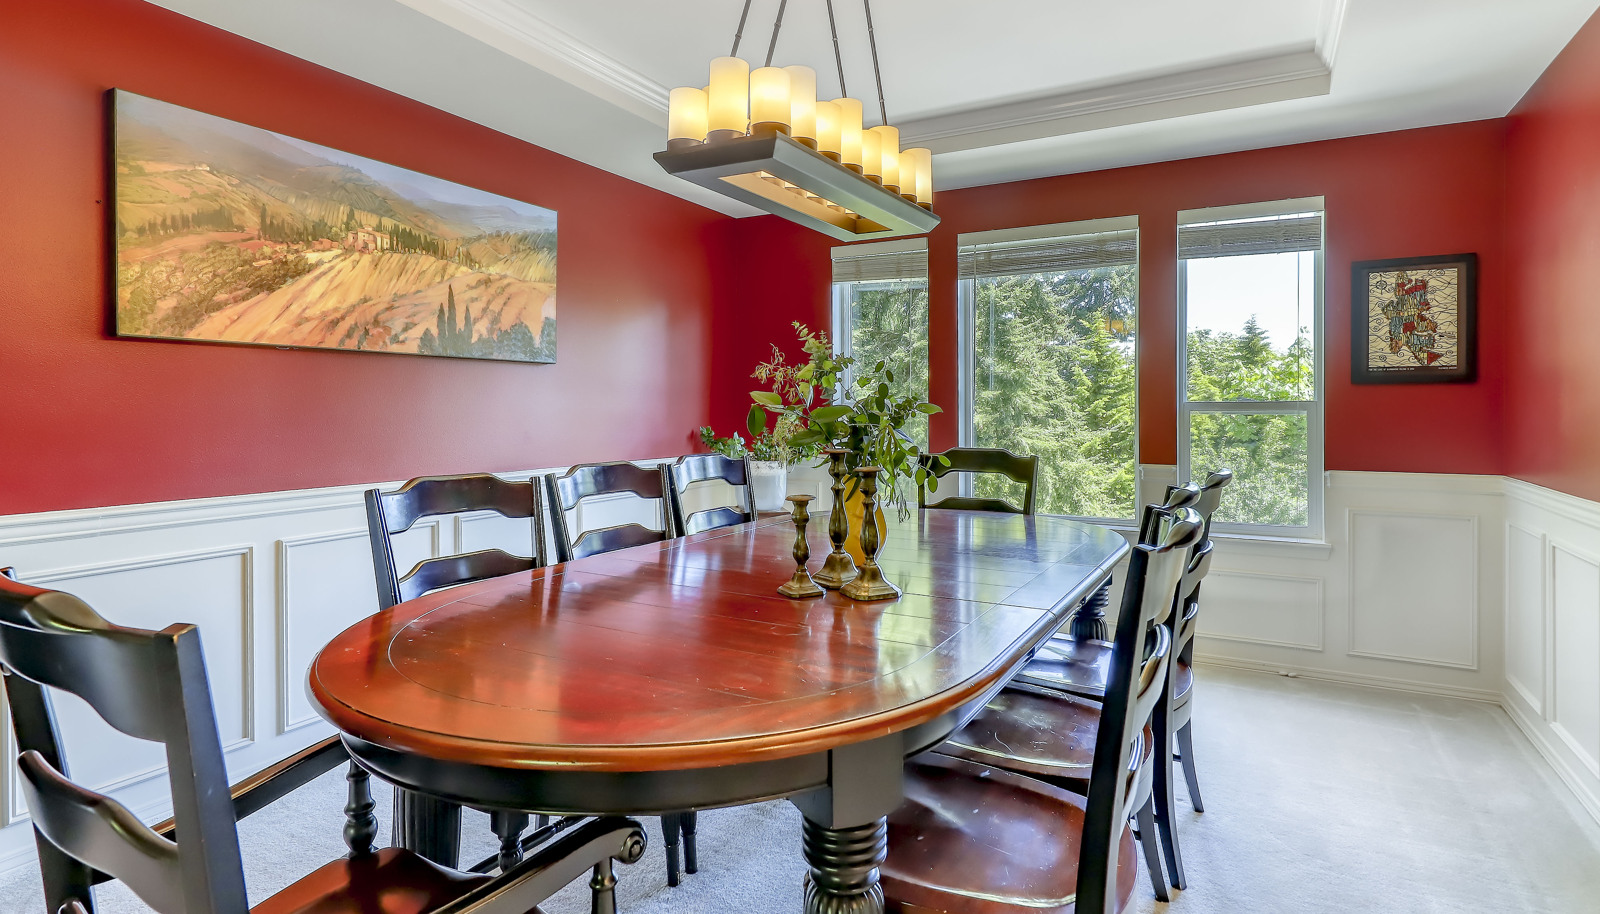 Dining area with wainscot and tray ceiling is very spacious to enjoy many special gatherings.